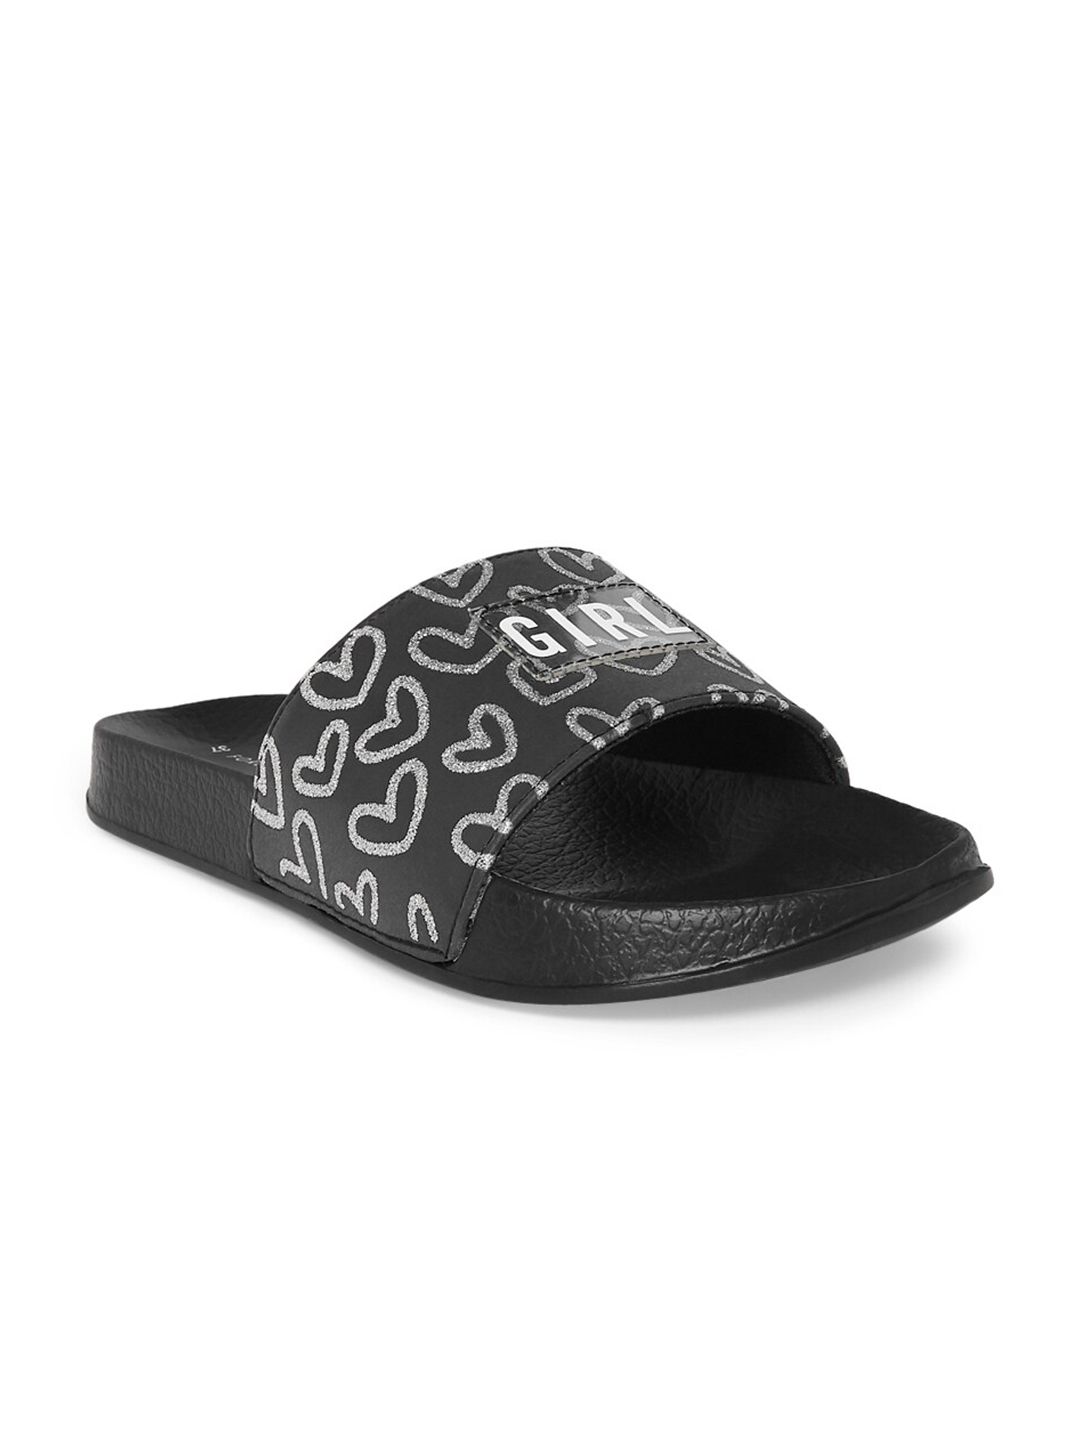 Forever Glam by Pantaloons Women Black & White Printed Sliders Price in India